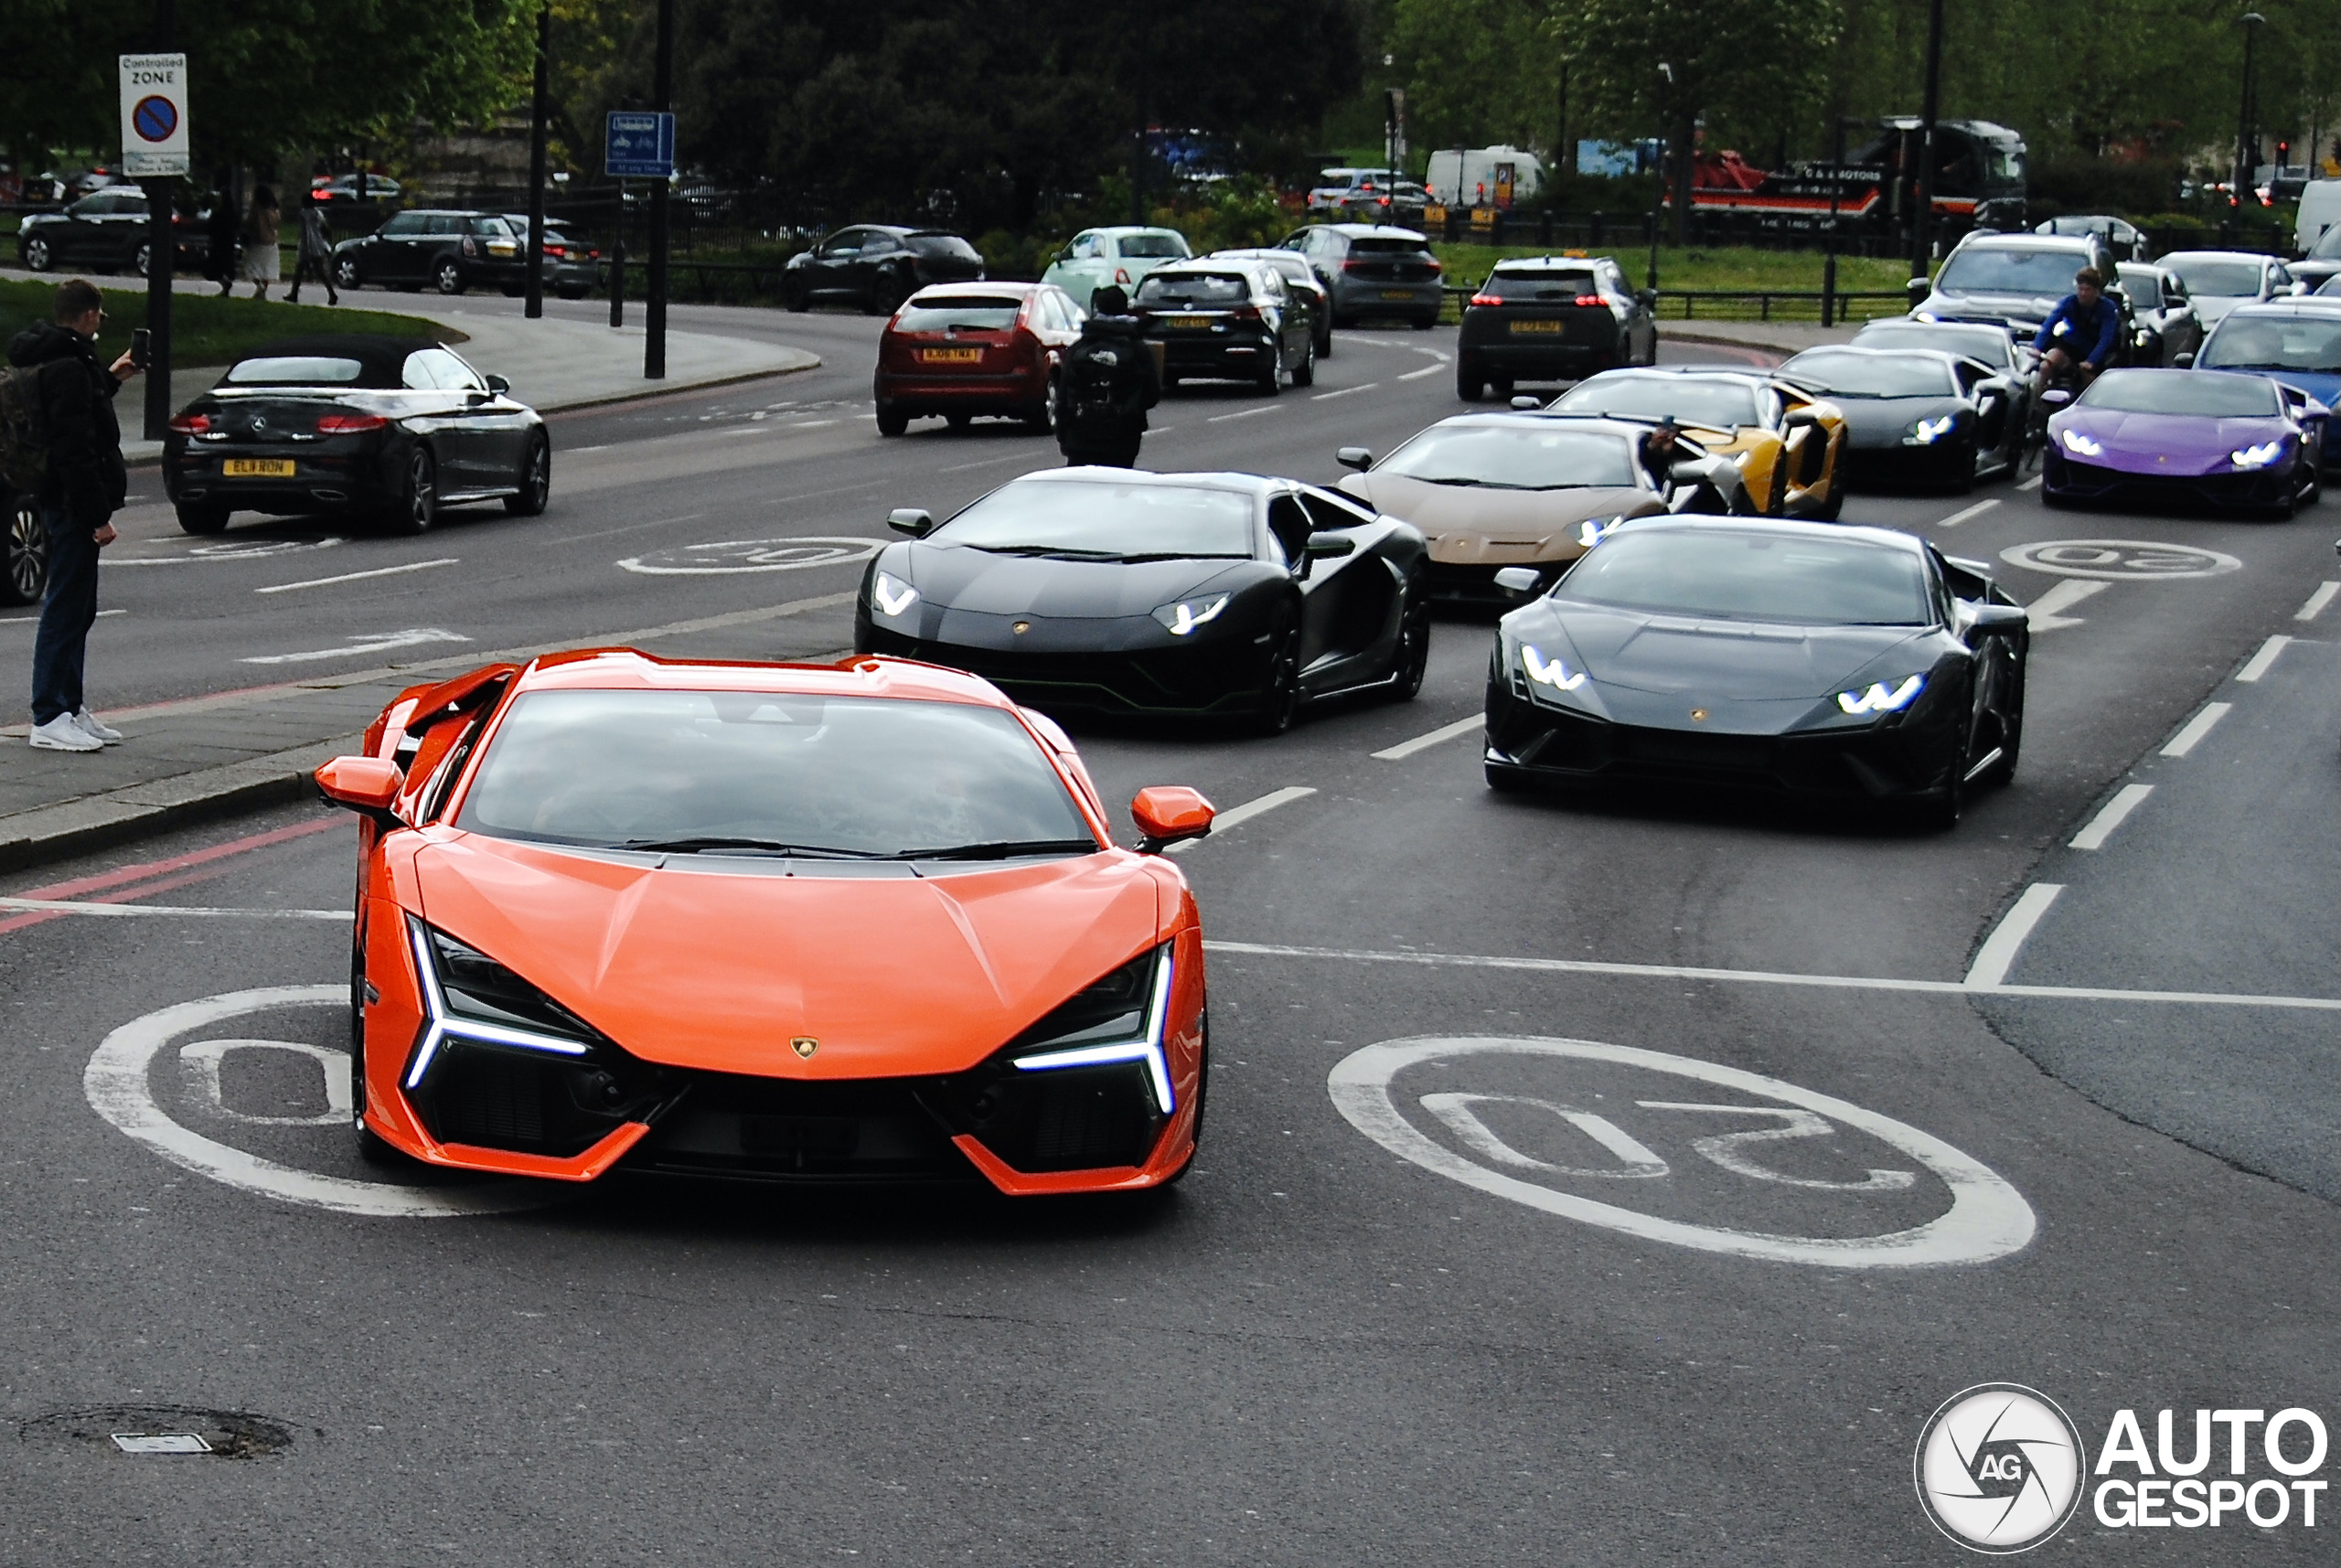 Has the Lambo apocalypse broken out in London?